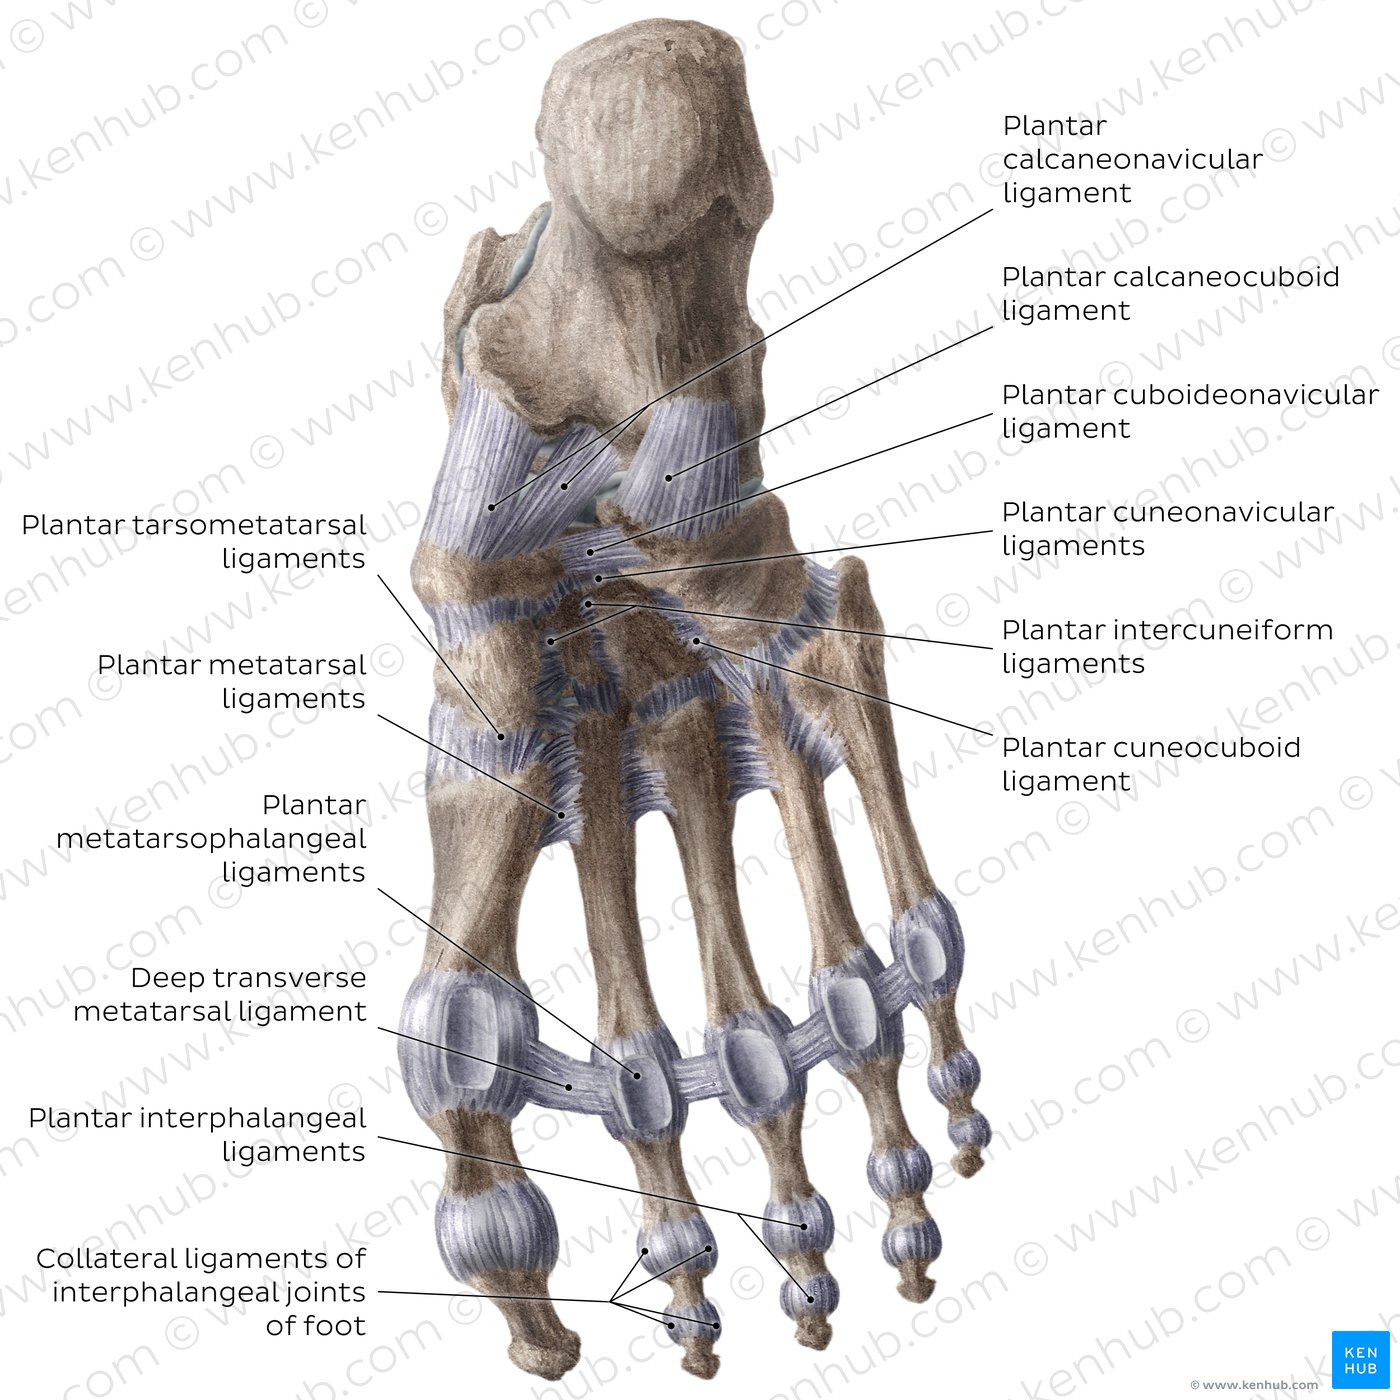 Ligaments of the foot (plantar view)